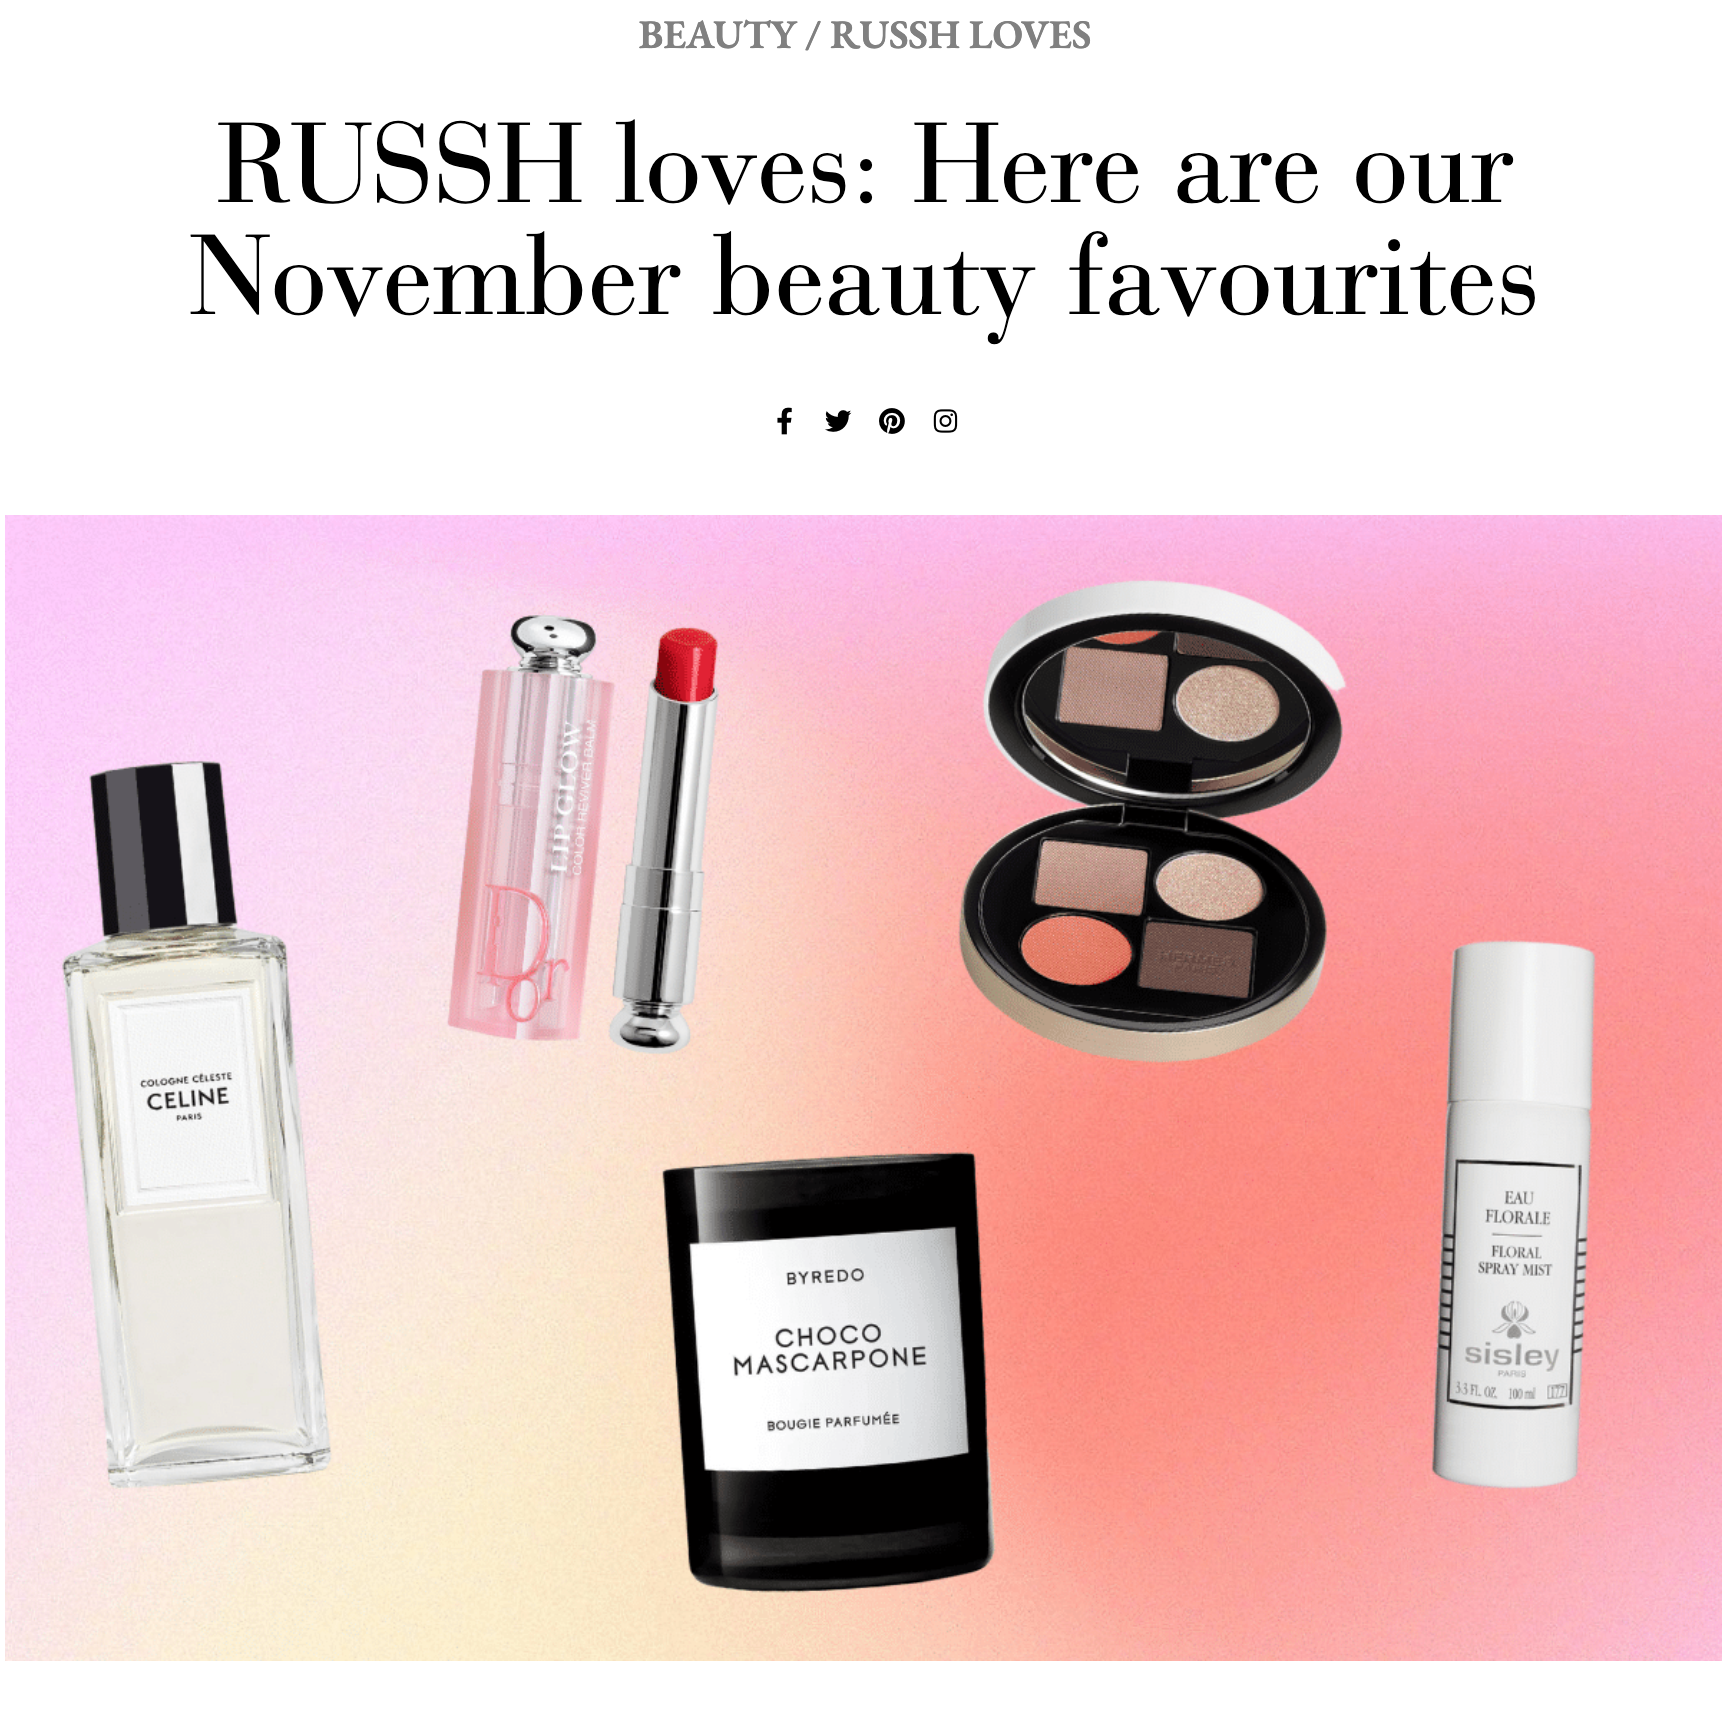 RUSSH loves: Here are our November beauty favourites